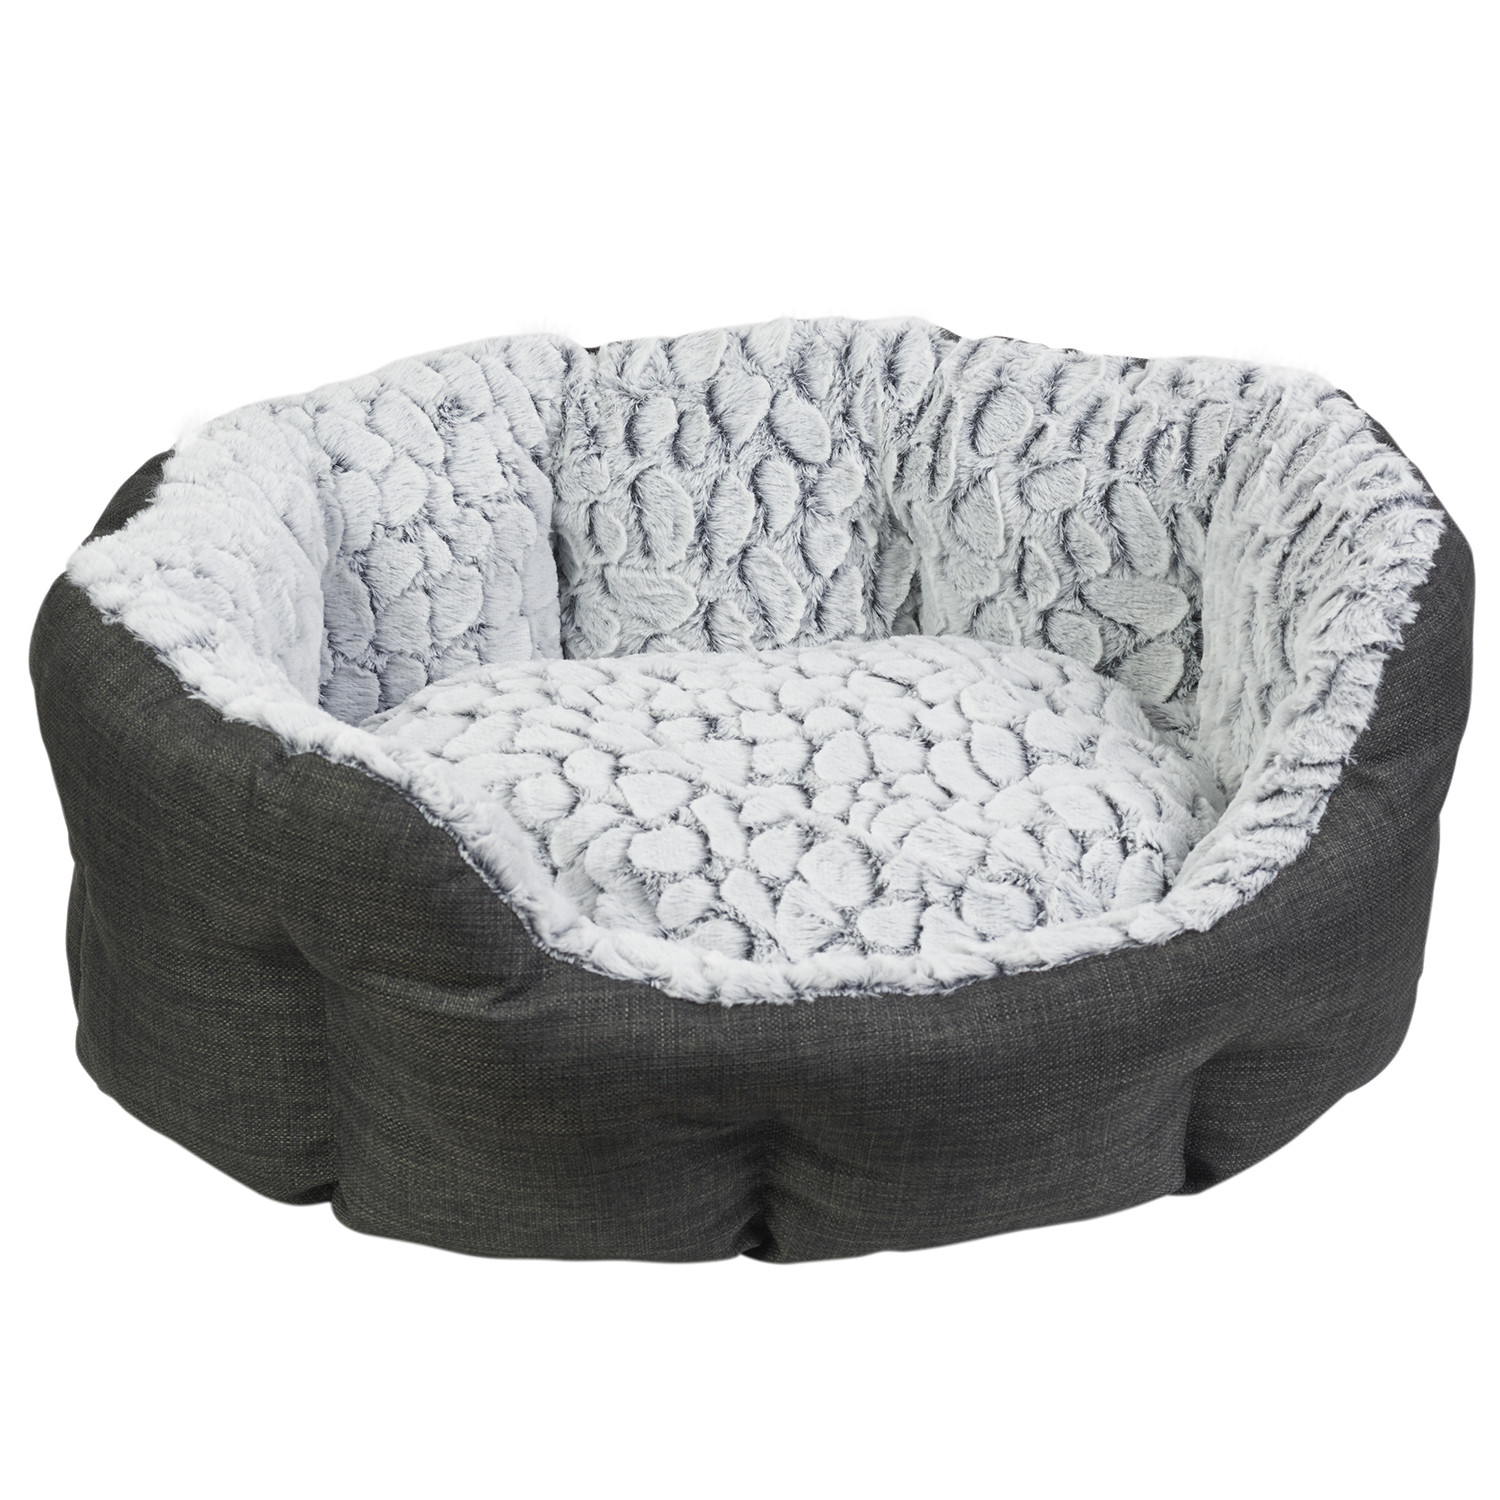 Clever Paws Grey Luxury Large Pet Bed Image